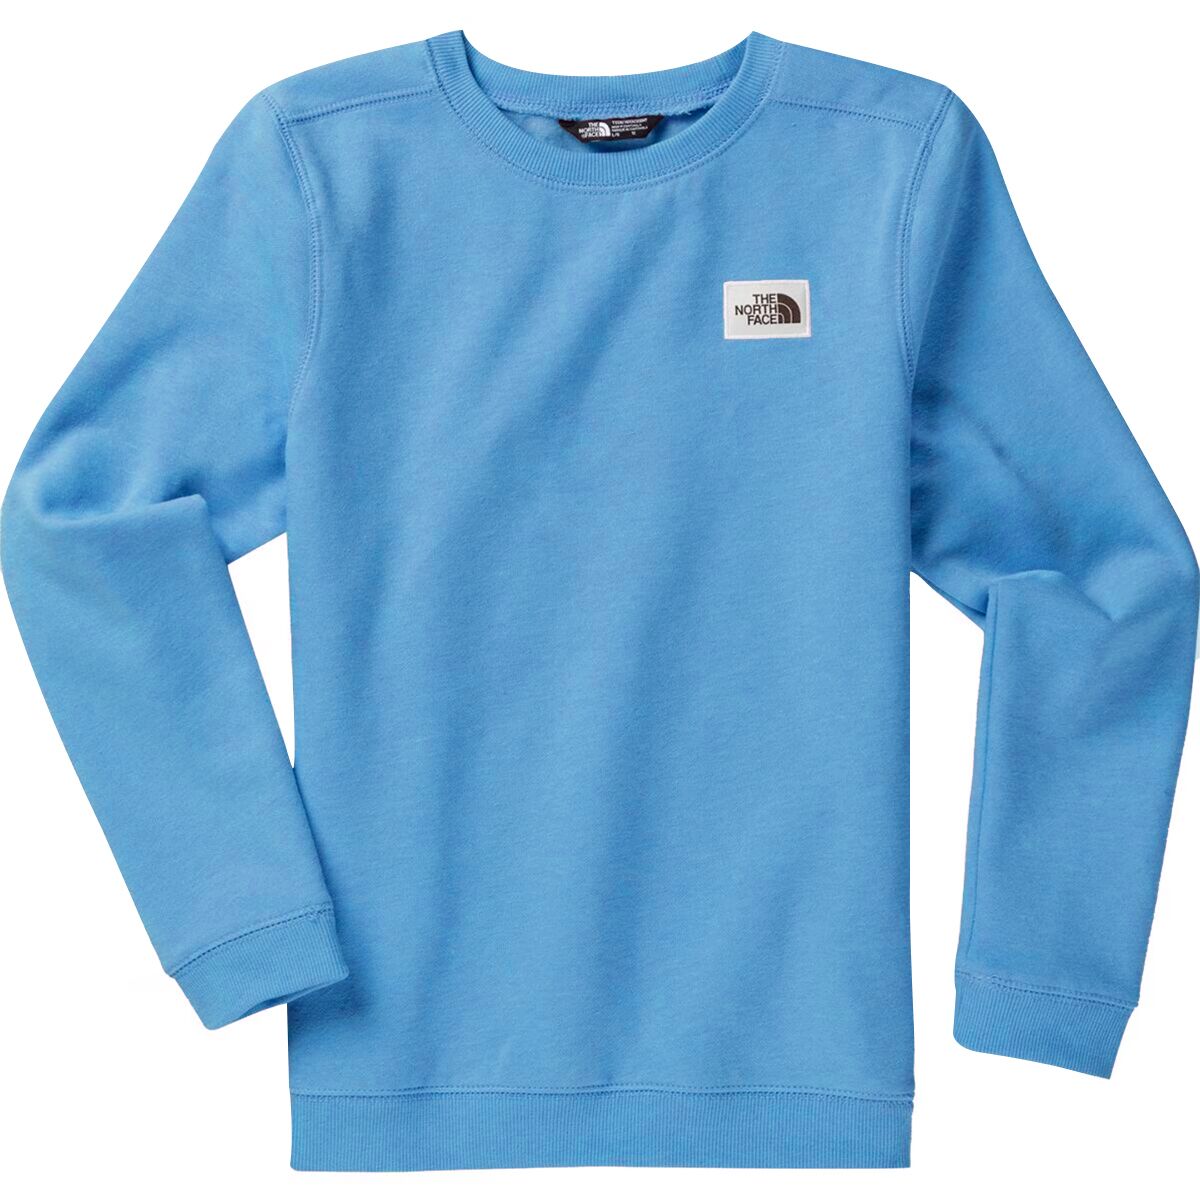 The North Face Heritage Patch Crew Sweatshirt - Kids'